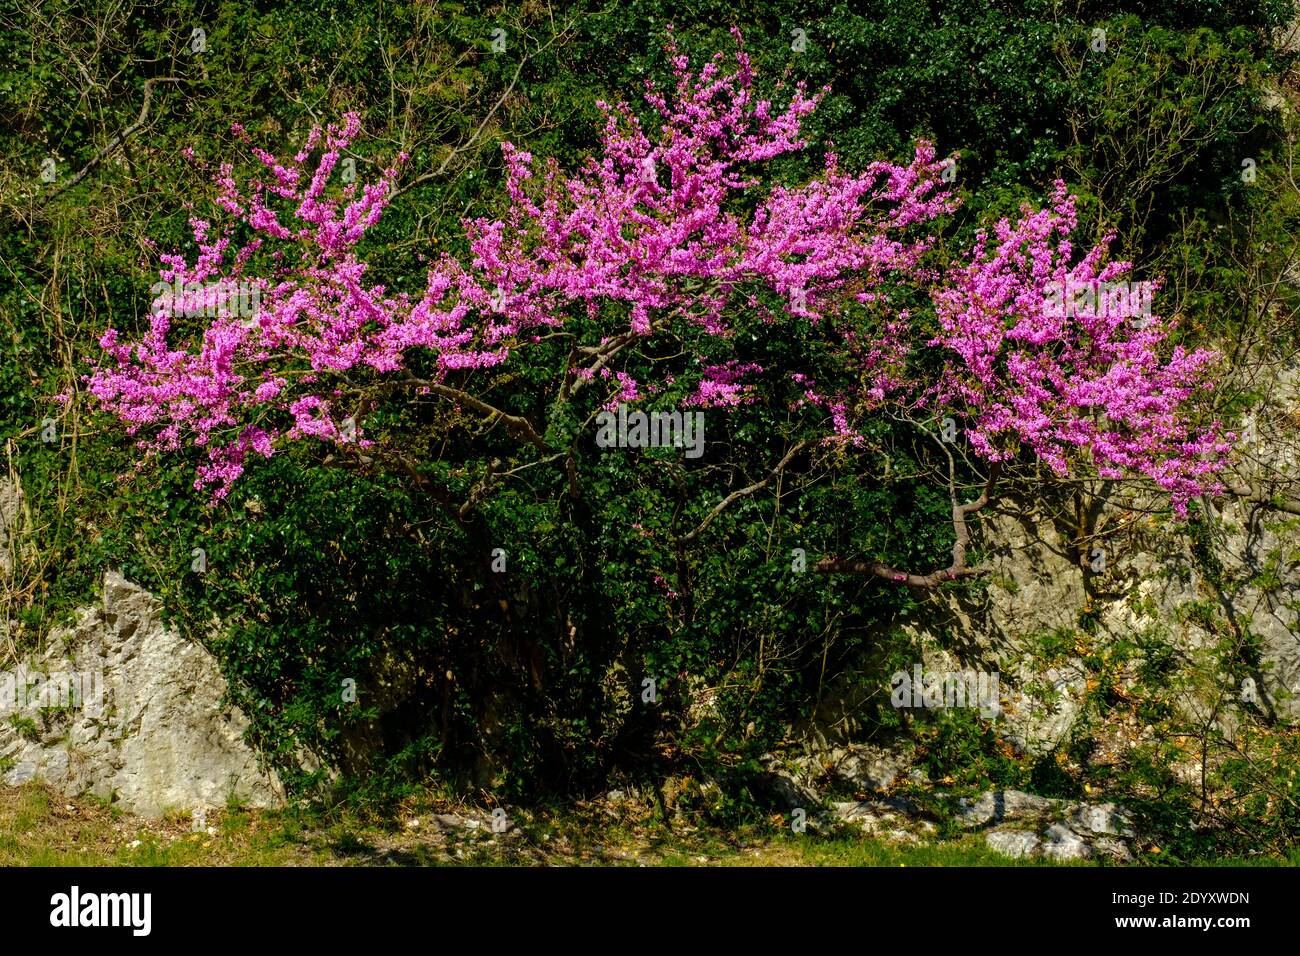 The colorful lilac flowers of the Judas tree Stock Photo